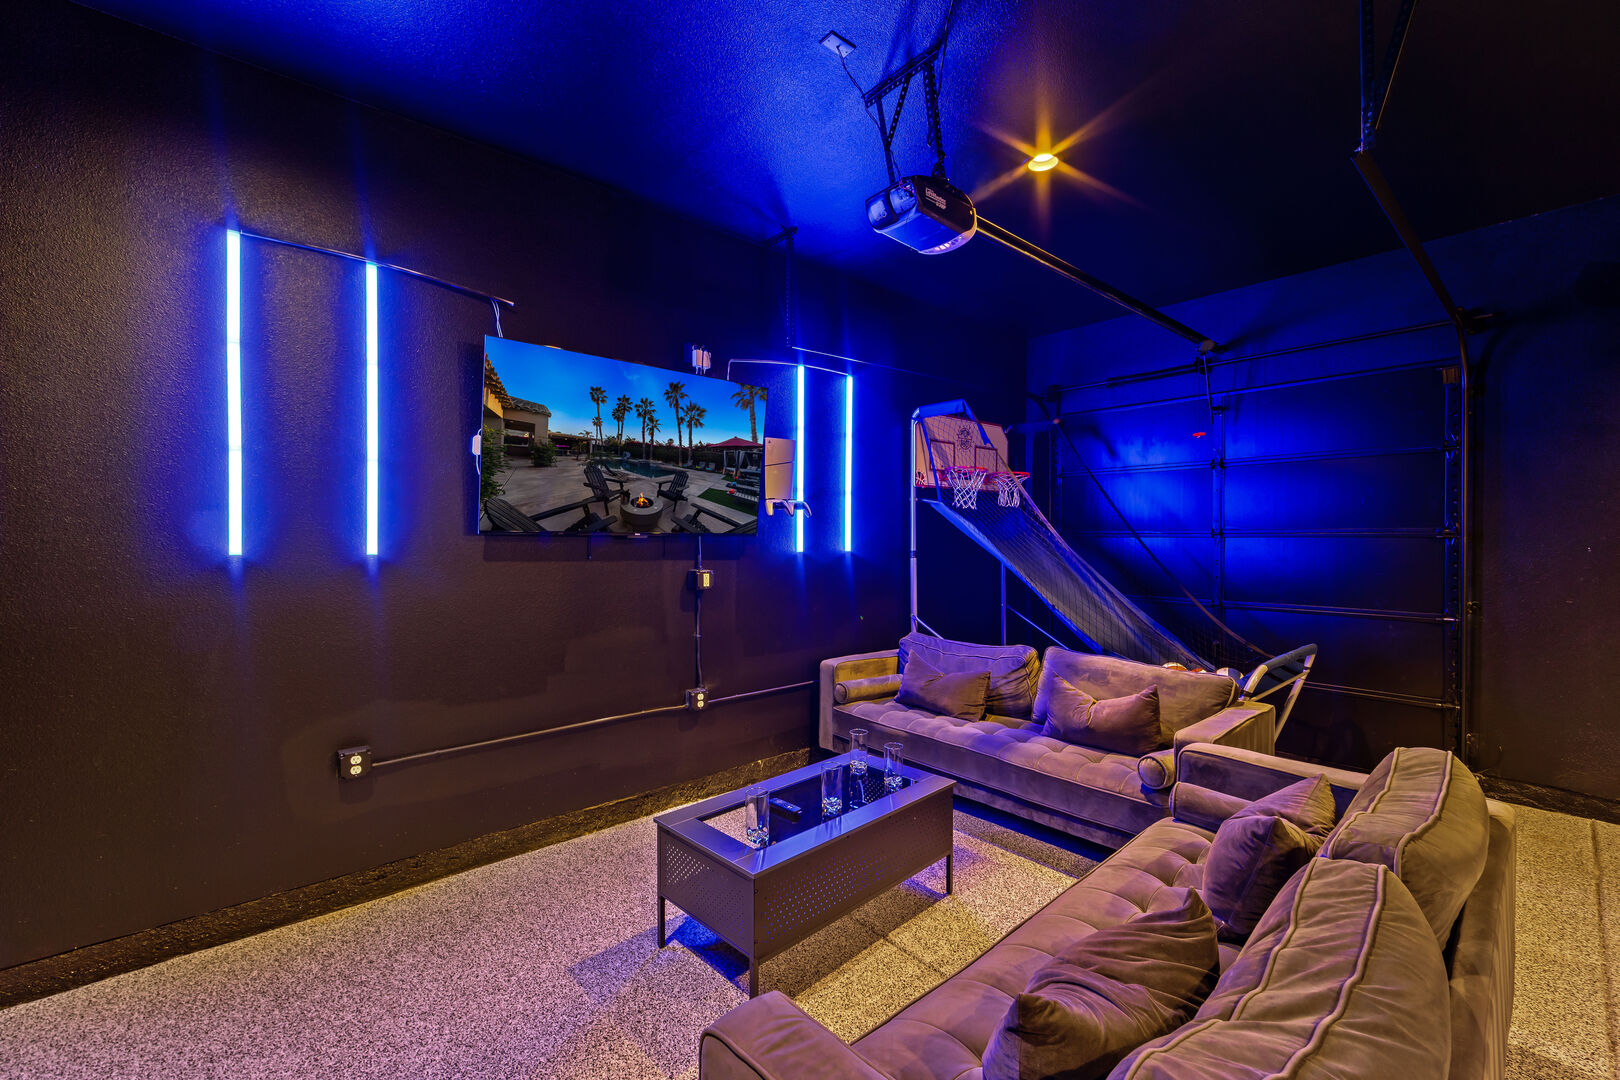 Encore's game room features a comfortable couch for relaxing between rounds of gaming fun.